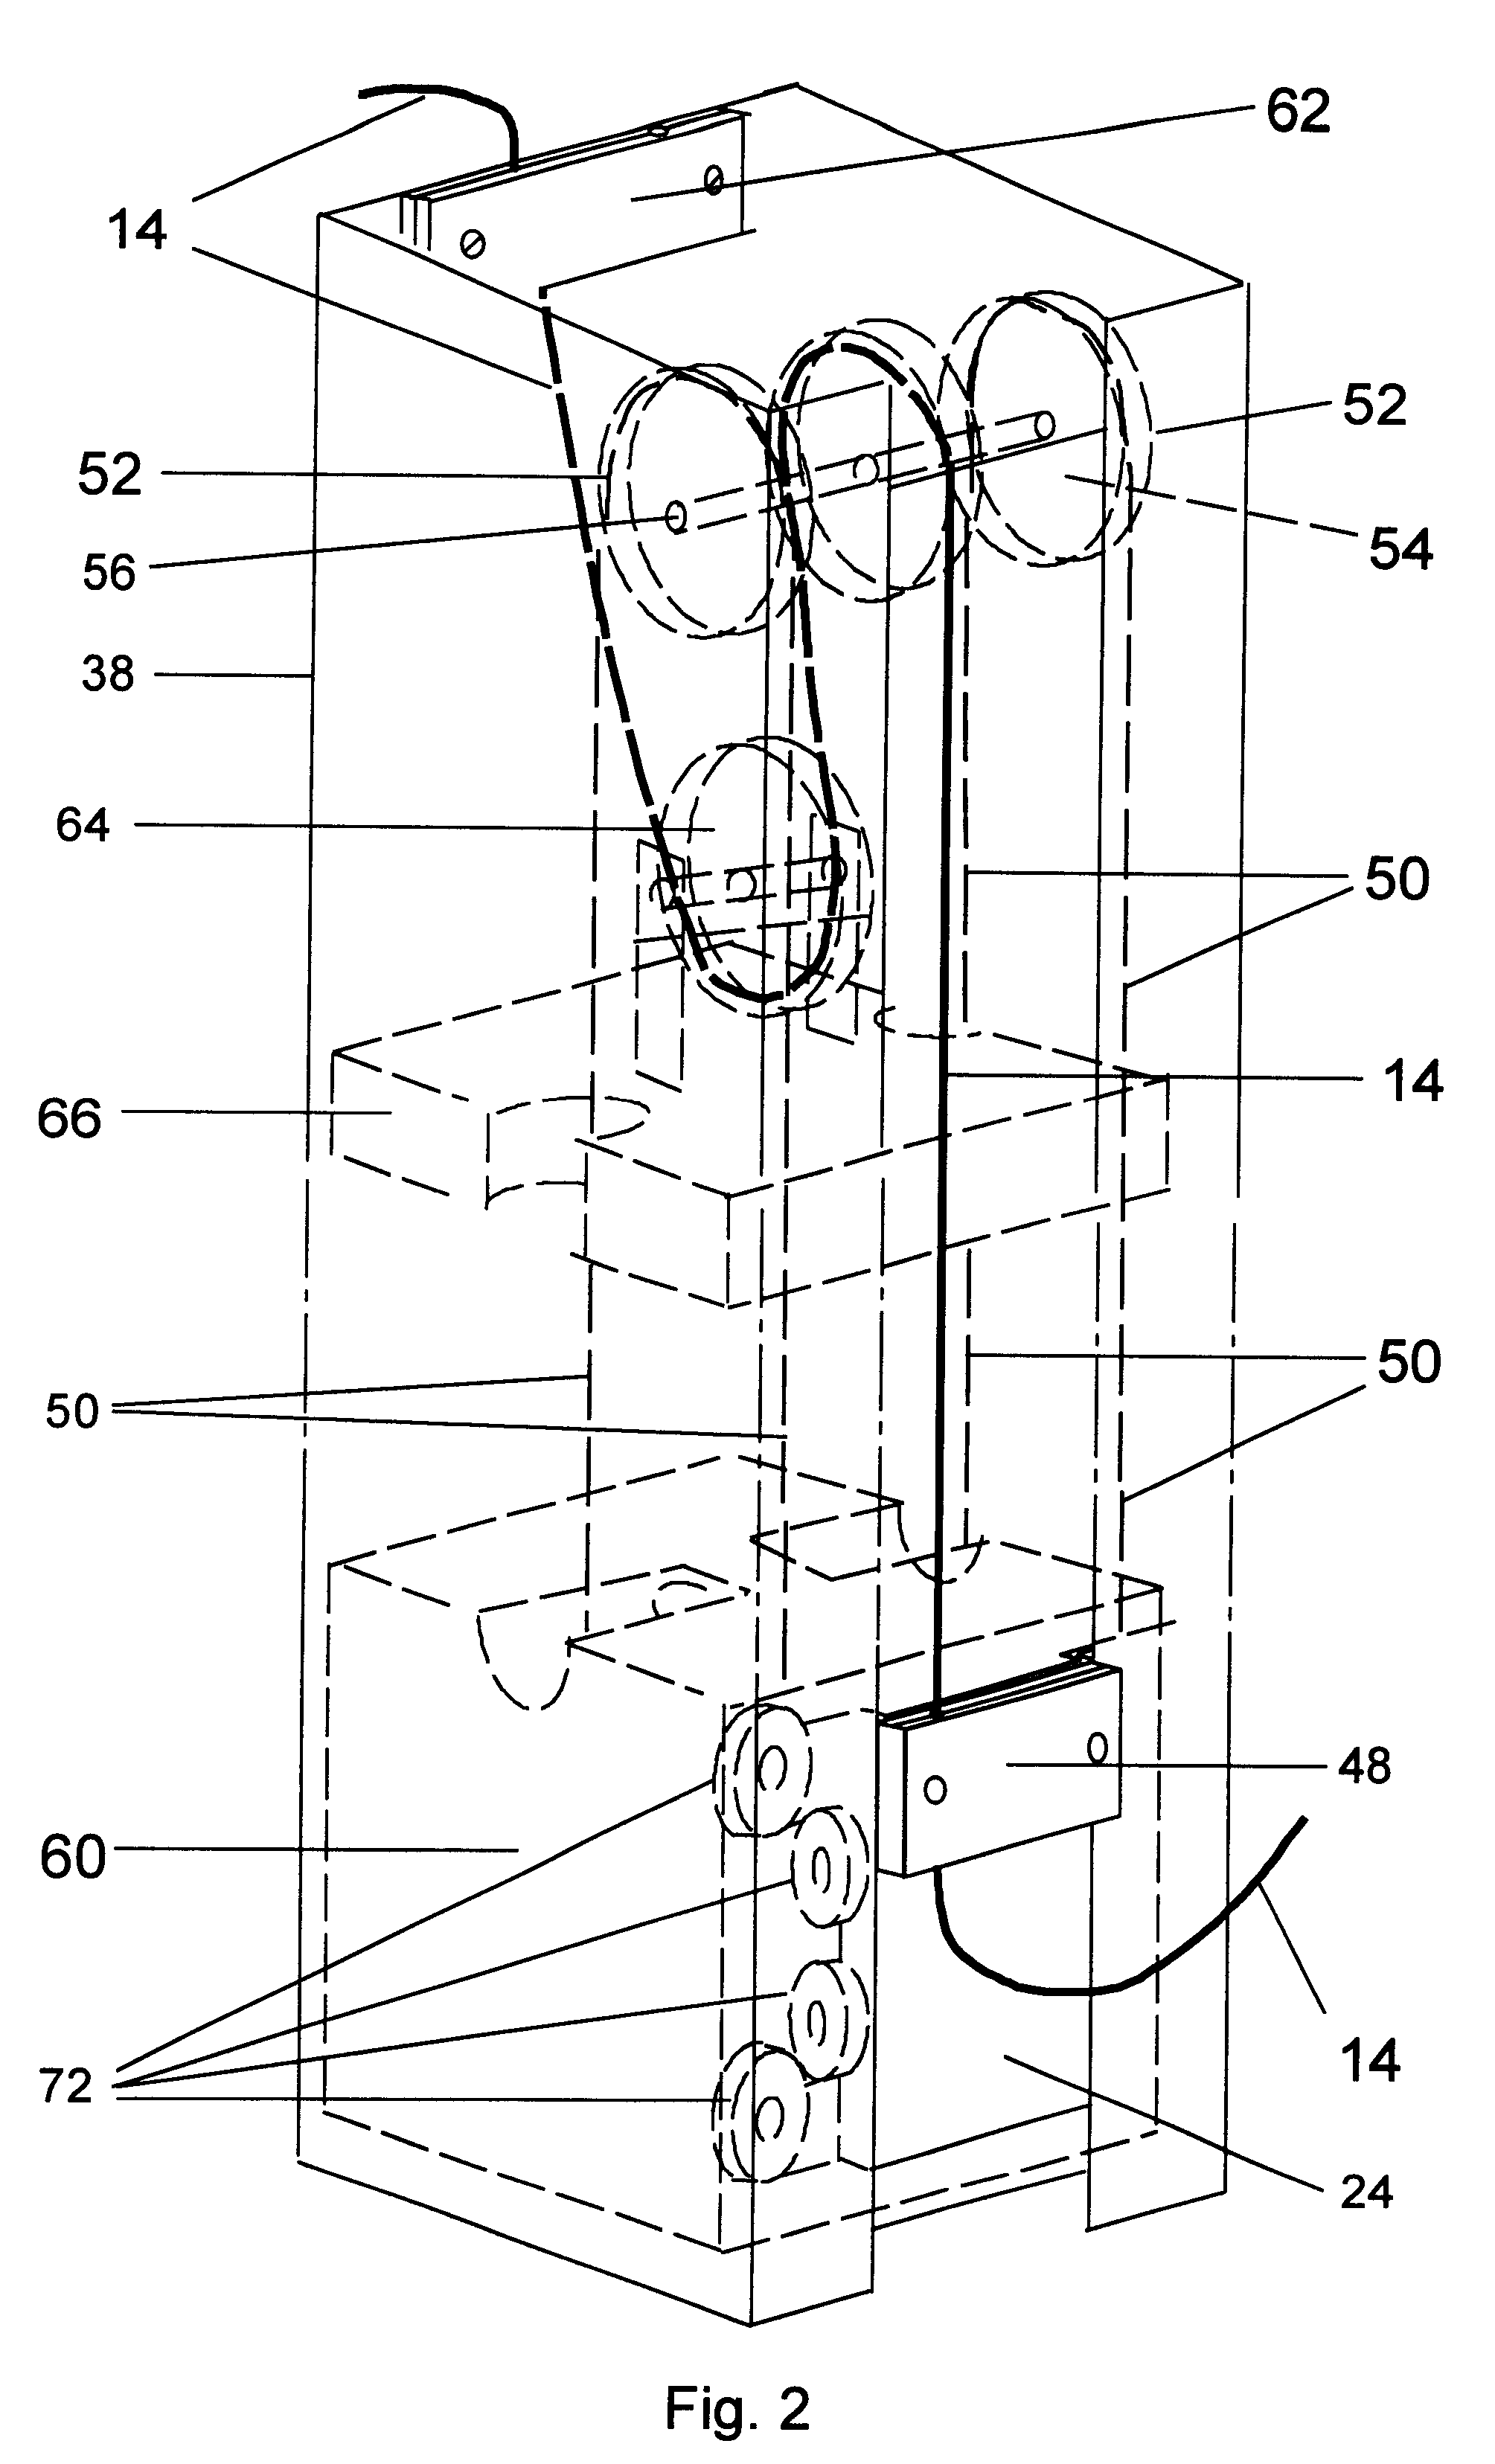 Ergonomic computer mounting device permitting extensive vertical, horizontal and angular ranges of motion